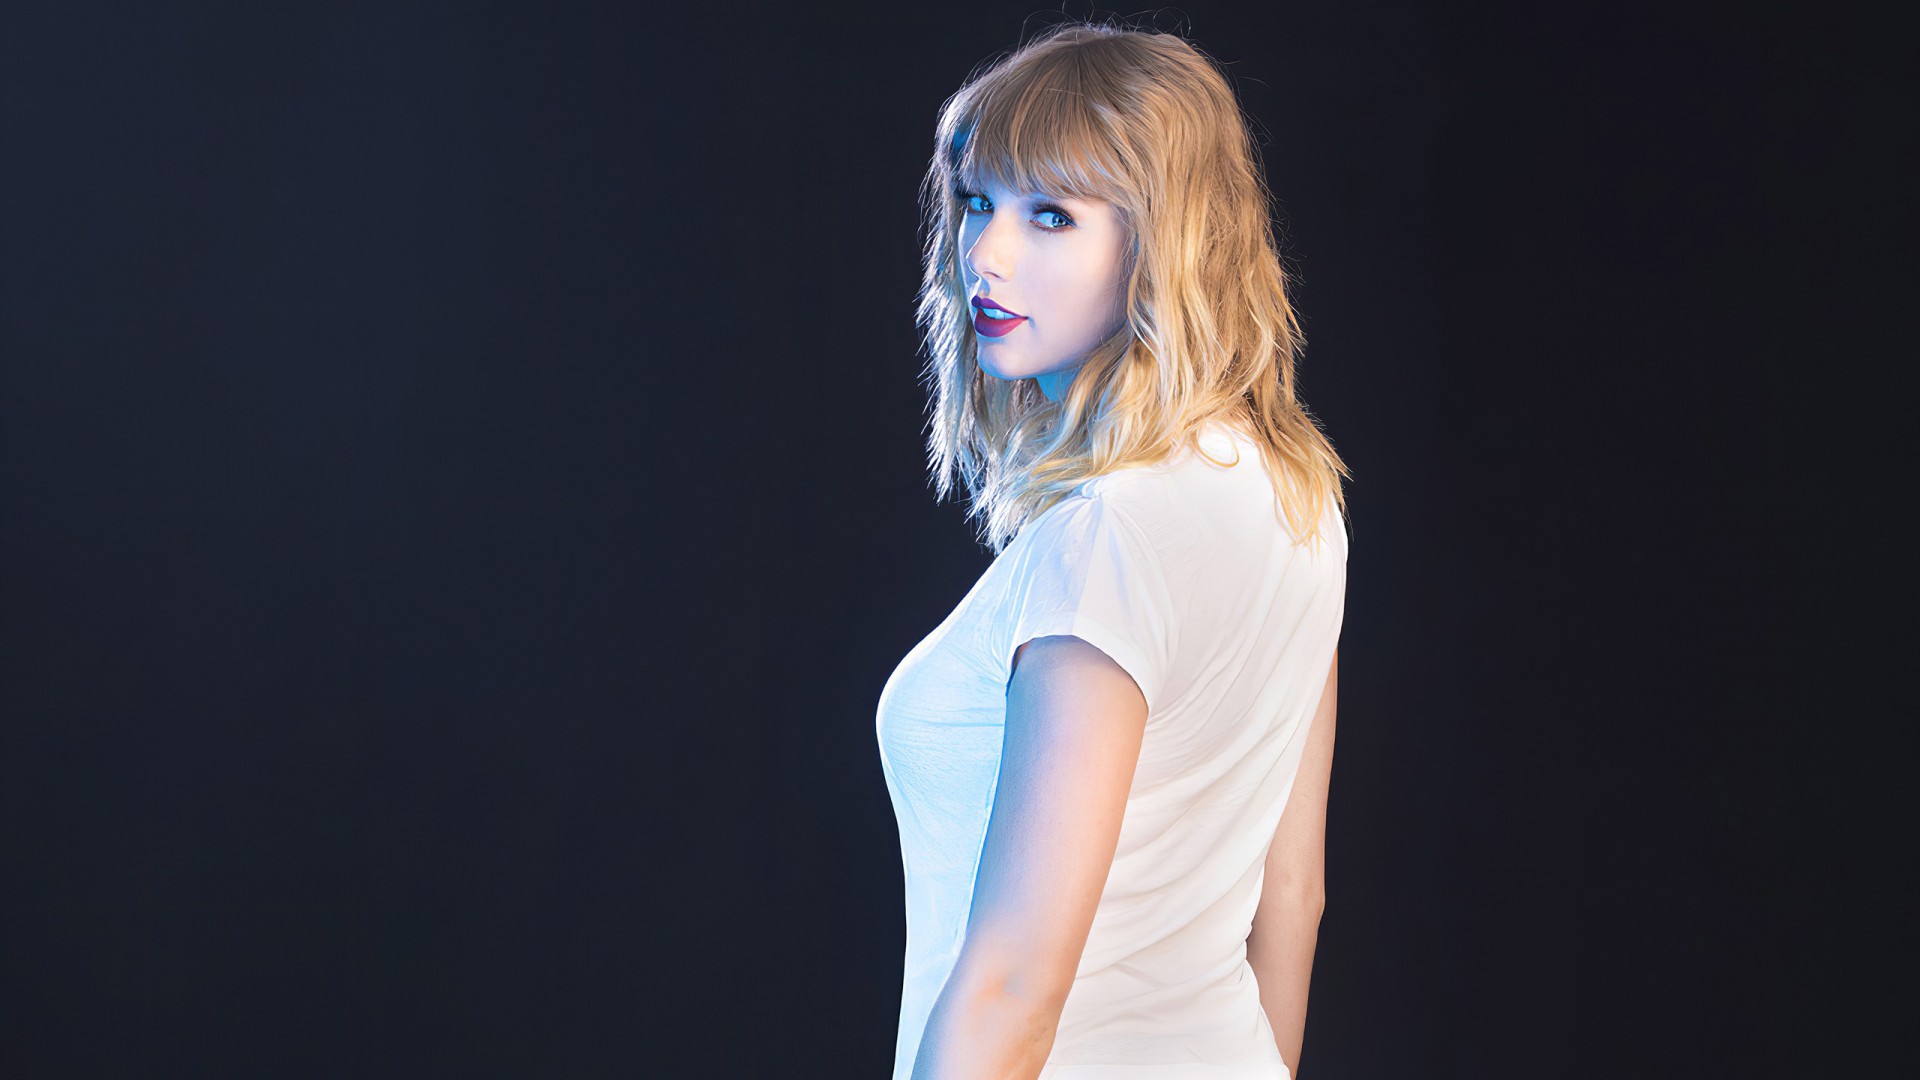 White Dress Wearing Taylor Swift With Background Of Black HD Taylor Swift Wallpaper